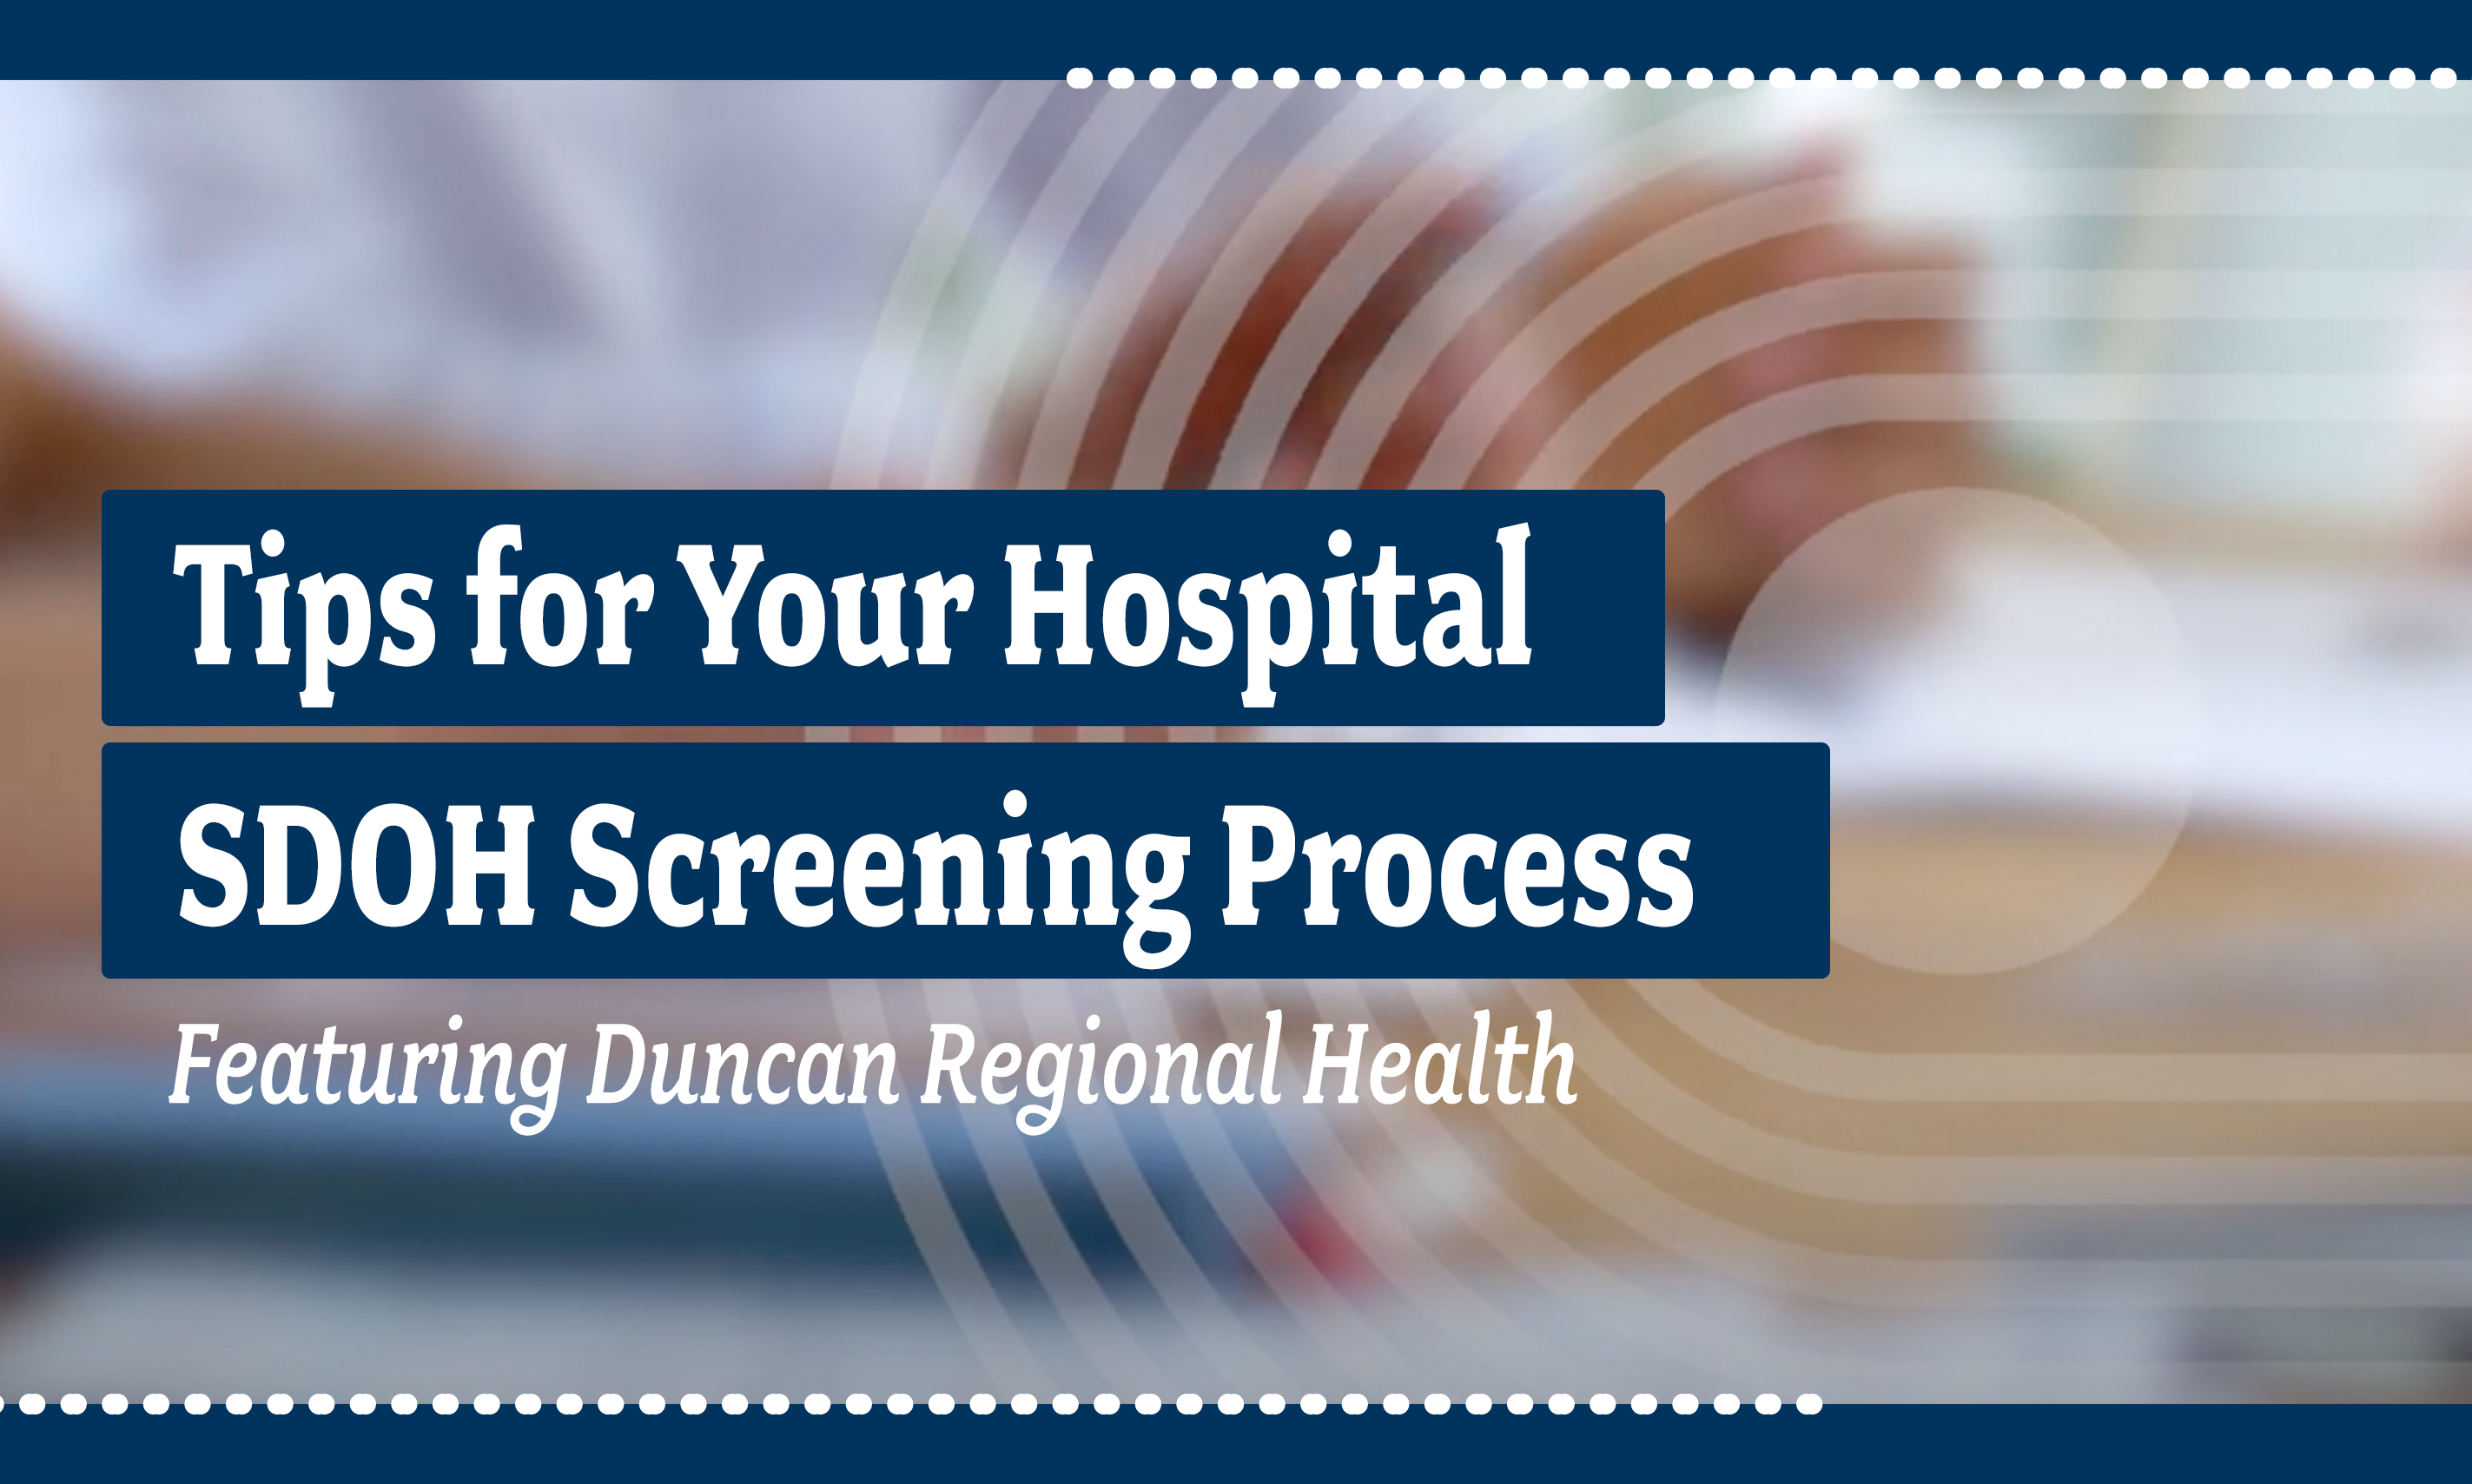 Tips for Your Hospital SDOH Screening Process